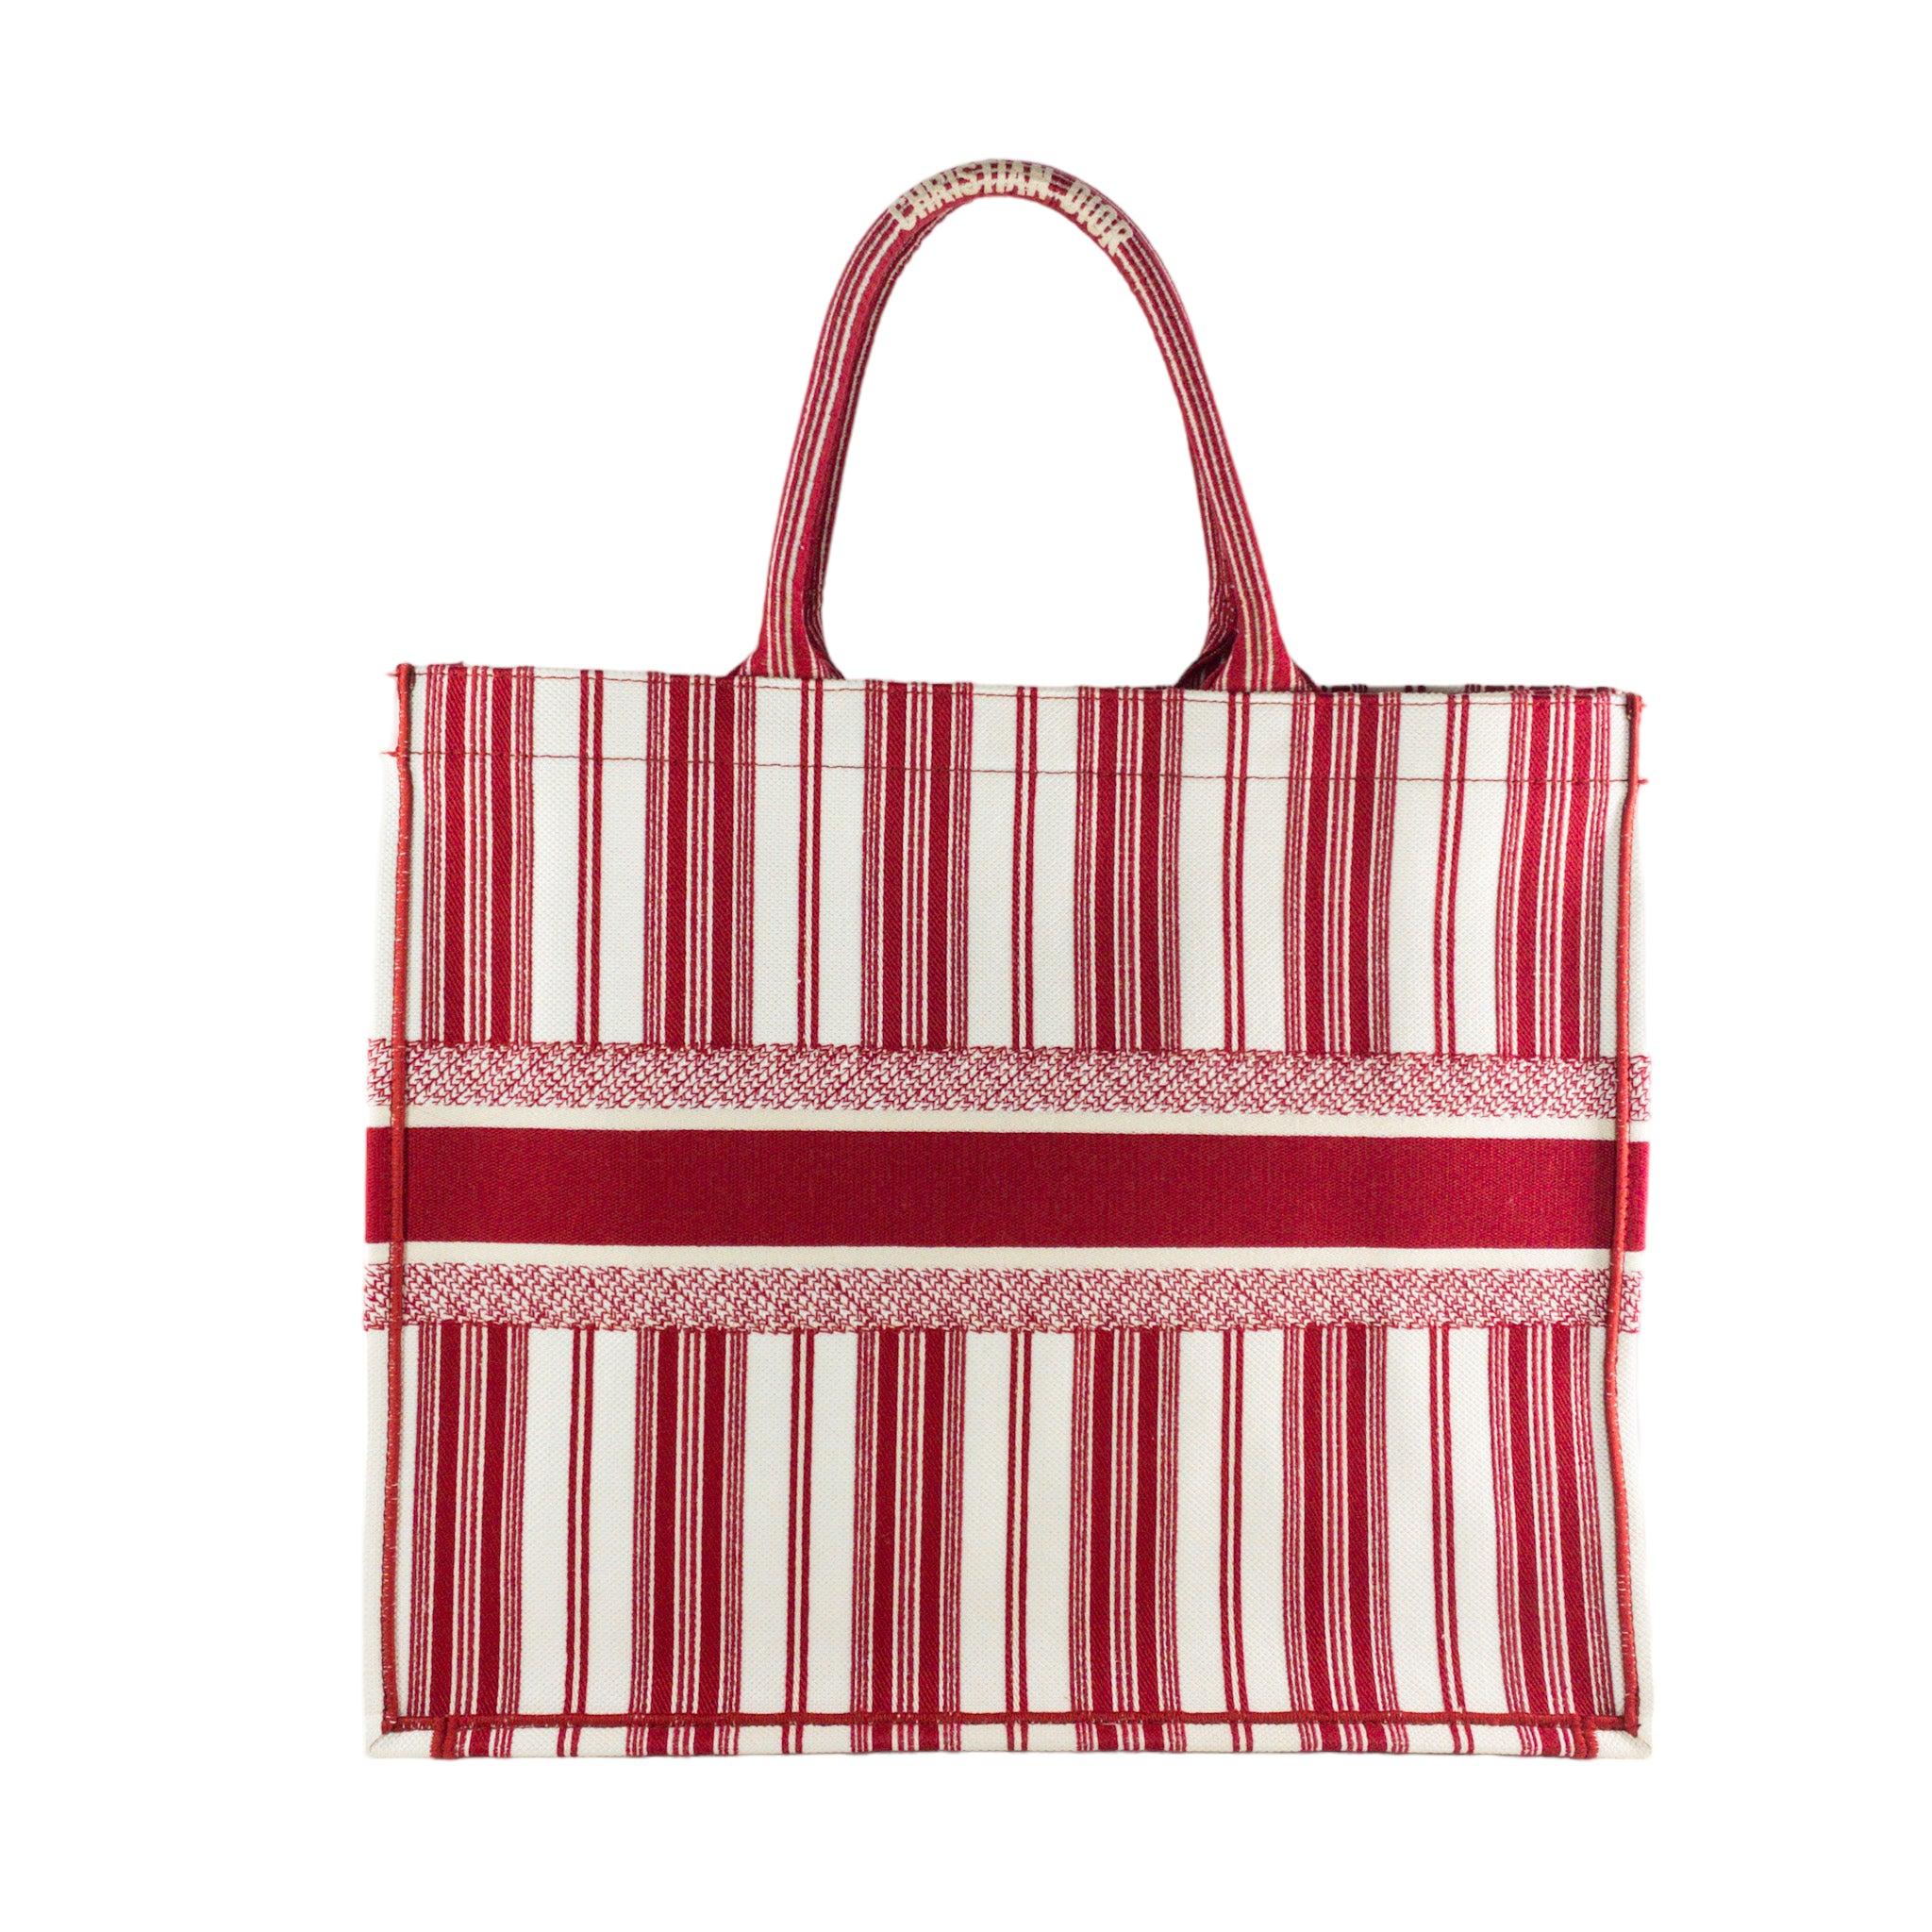 Dior Red Striped Embroidered Large Book Tote Bag

This is an Authentic Dior Book Tote in size Large. Striped embroidered canvas in red and white 'Christian Dior' in front with large stationary top handles. Large interior cavity. Unlined

Additional